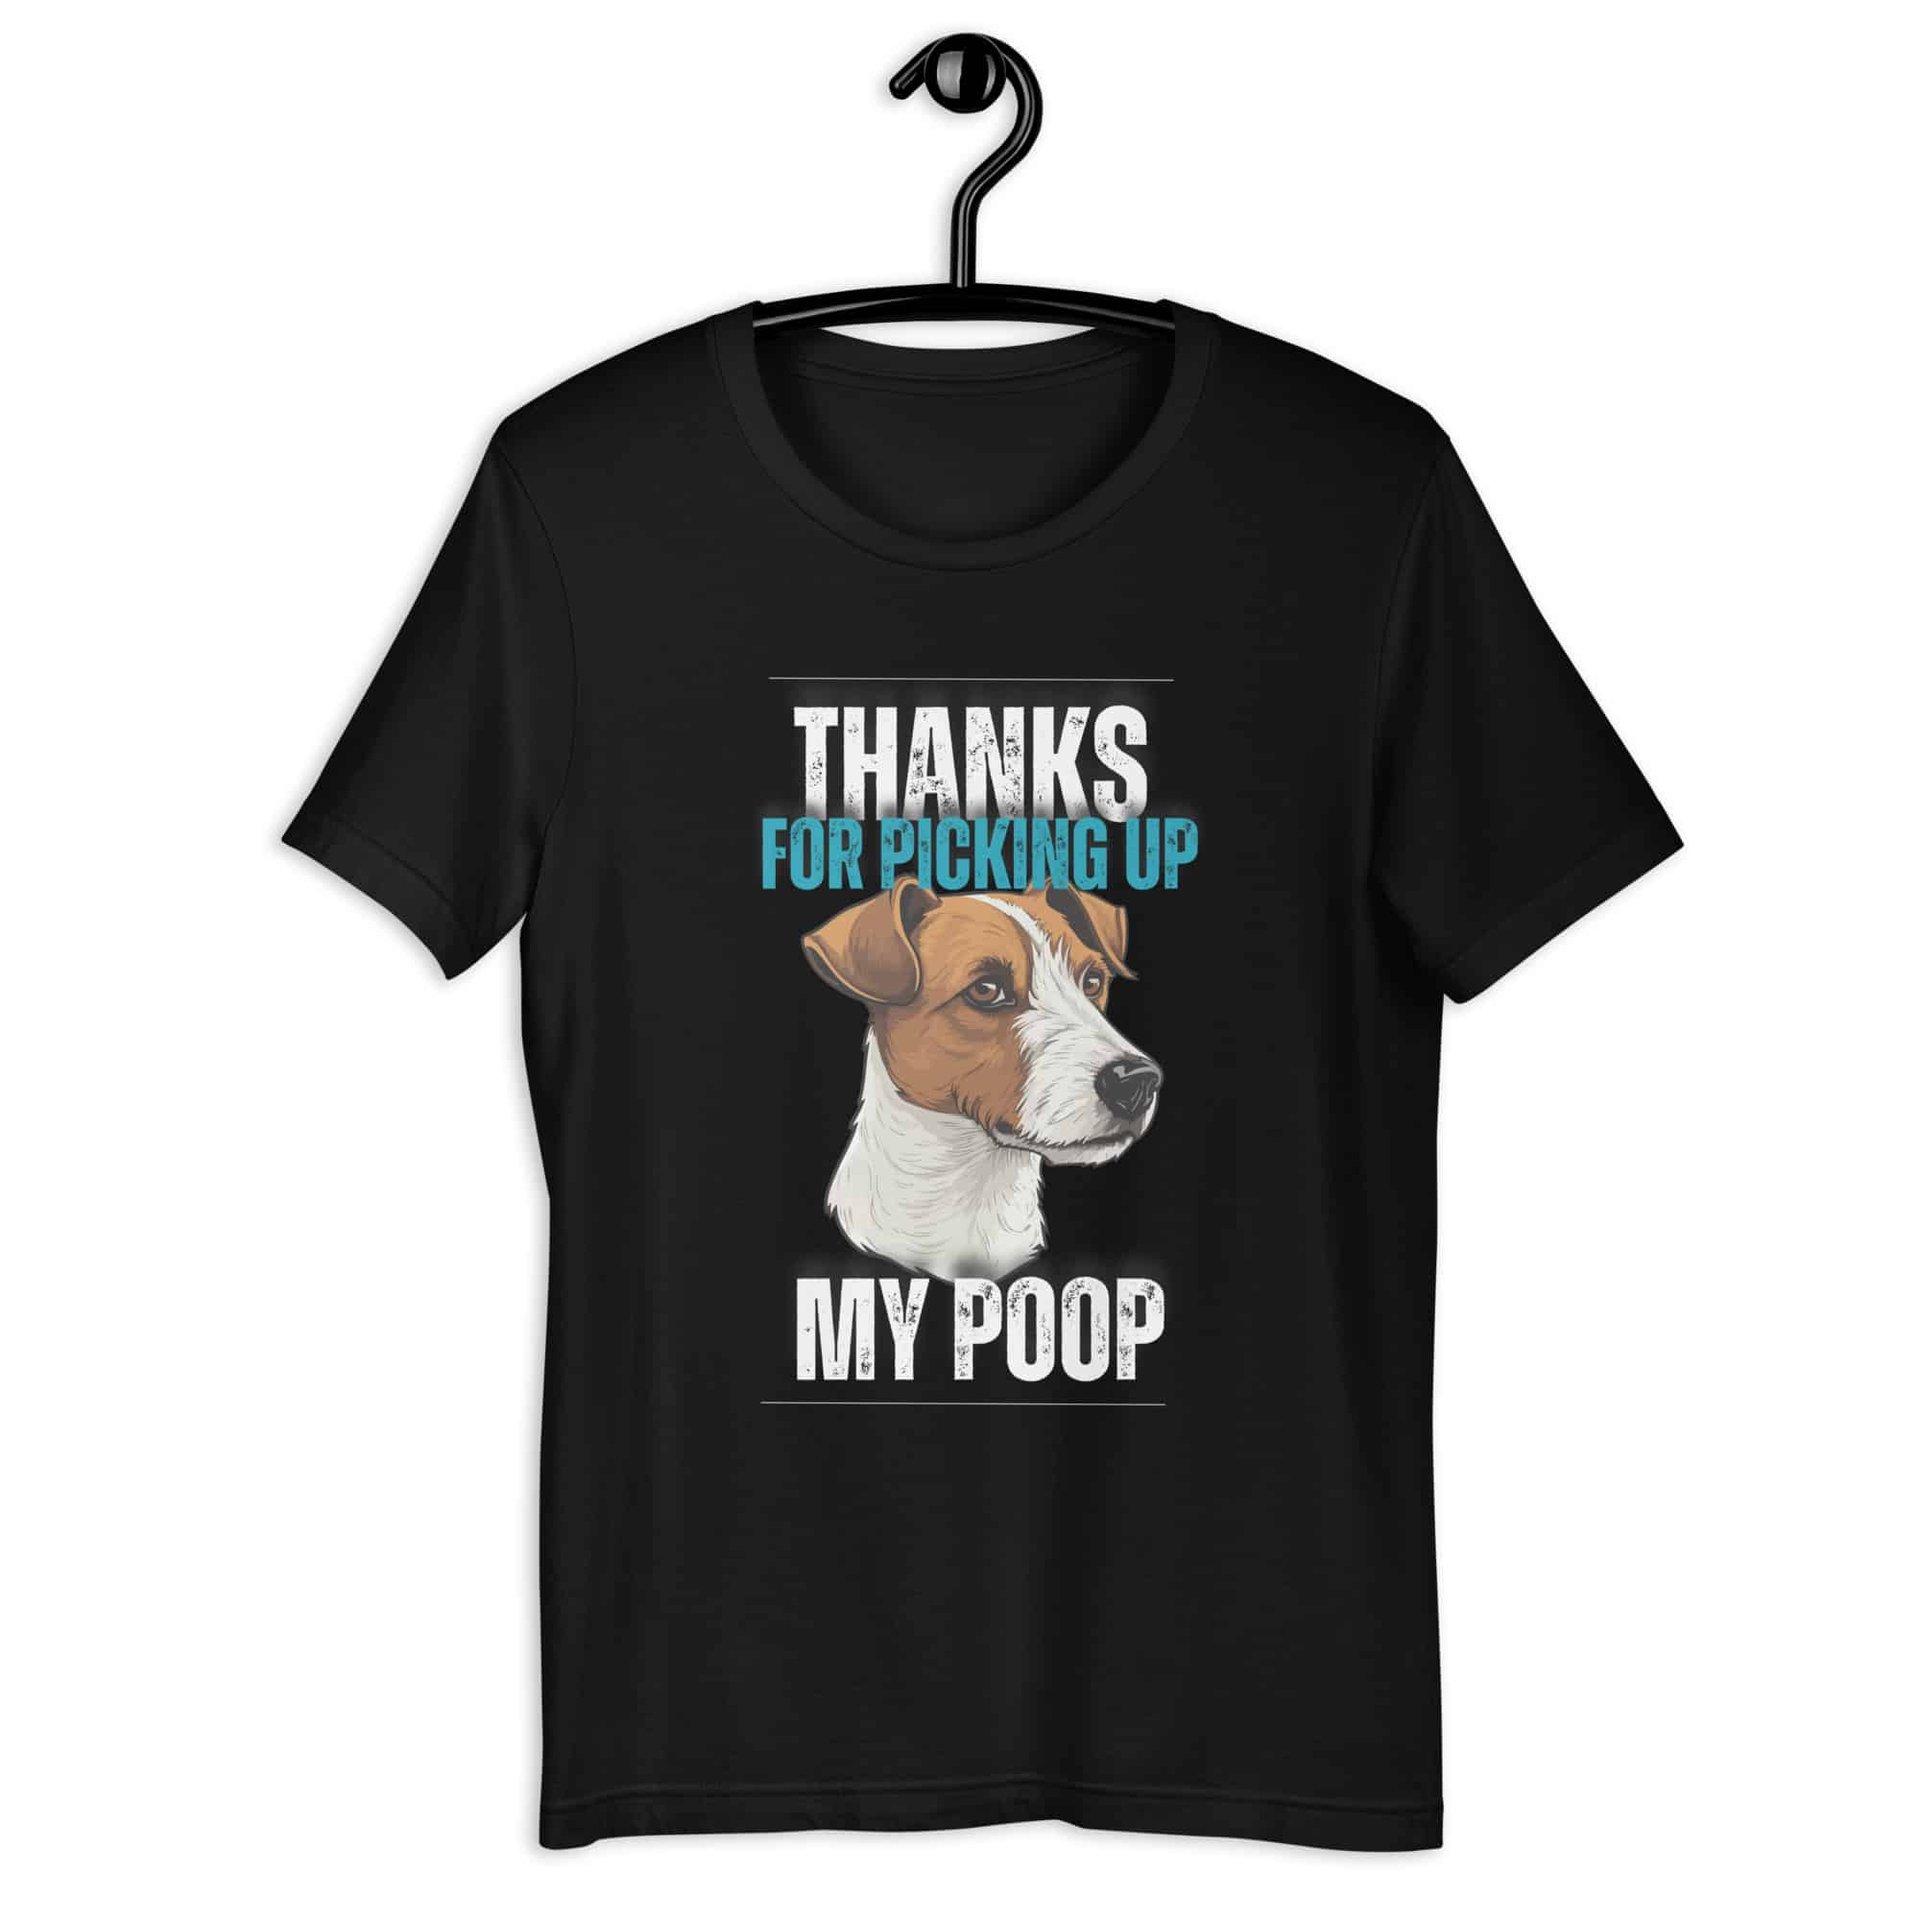 Thanks For Picking Up My POOP Funny Retrievers Unisex T-Shirt. Black